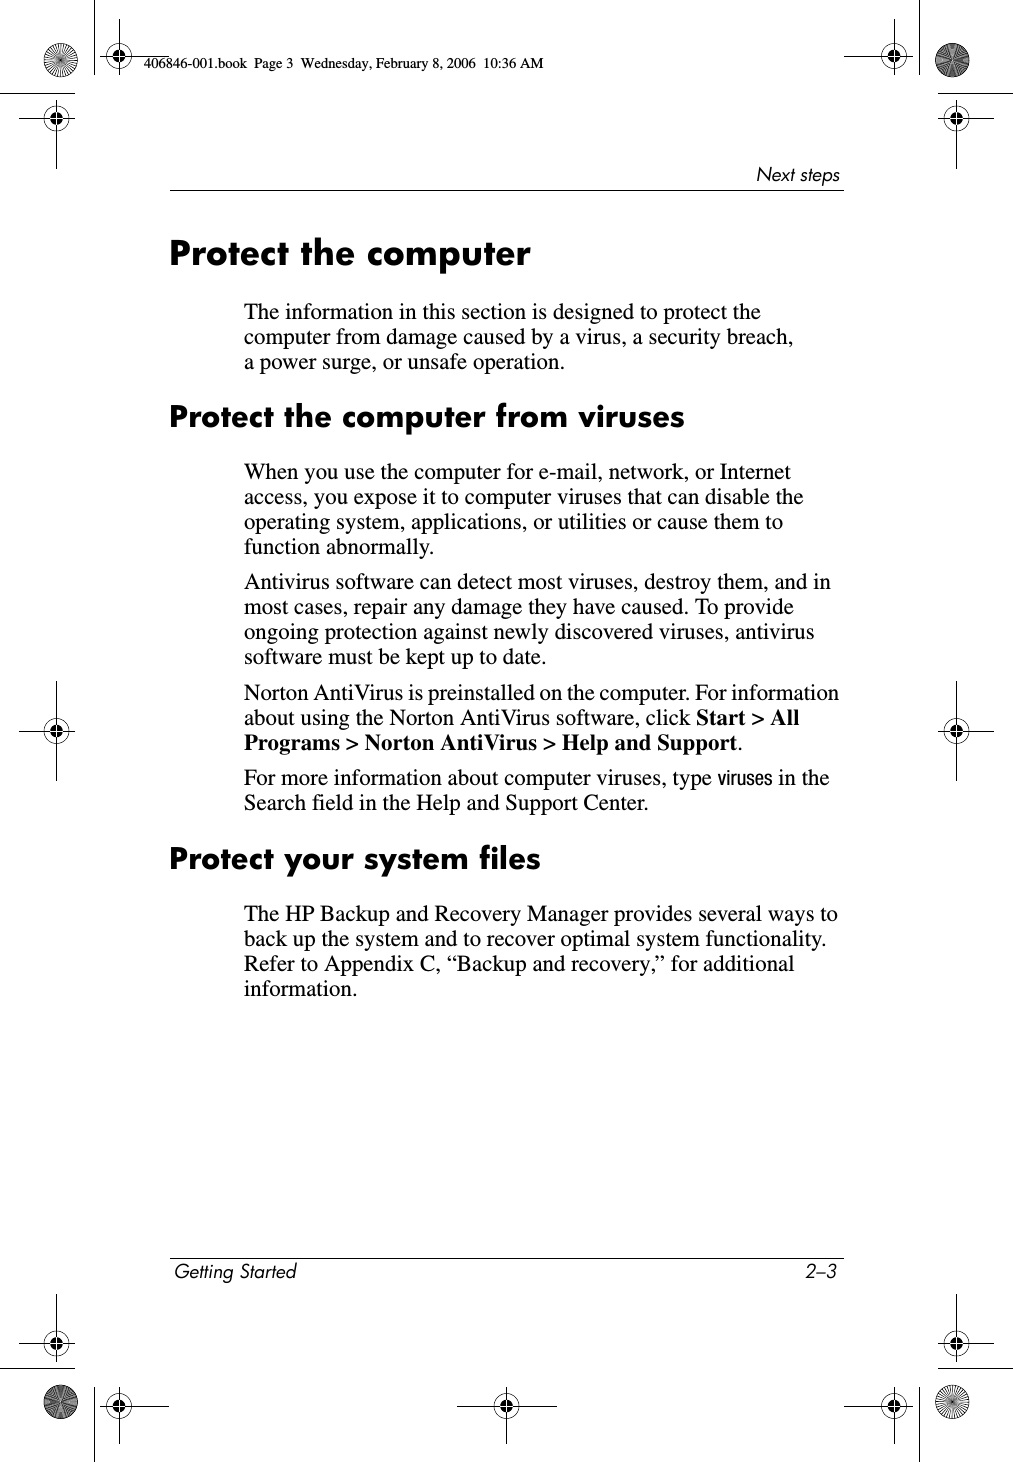 Next stepsGetting Started 2–3Protect the computerThe information in this section is designed to protect the computer from damage caused by a virus, a security breach, a power surge, or unsafe operation.Protect the computer from virusesWhen you use the computer for e-mail, network, or Internet access, you expose it to computer viruses that can disable the operating system, applications, or utilities or cause them to function abnormally. Antivirus software can detect most viruses, destroy them, and in most cases, repair any damage they have caused. To provide ongoing protection against newly discovered viruses, antivirus software must be kept up to date.Norton AntiVirus is preinstalled on the computer. For information about using the Norton AntiVirus software, click Start &gt; All Programs &gt; Norton AntiVirus &gt; Help and Support.For more information about computer viruses, type viruses in the Search field in the Help and Support Center.Protect your system filesThe HP Backup and Recovery Manager provides several ways to back up the system and to recover optimal system functionality. Refer to Appendix C, “Backup and recovery,” for additional information.406846-001.book  Page 3  Wednesday, February 8, 2006  10:36 AM